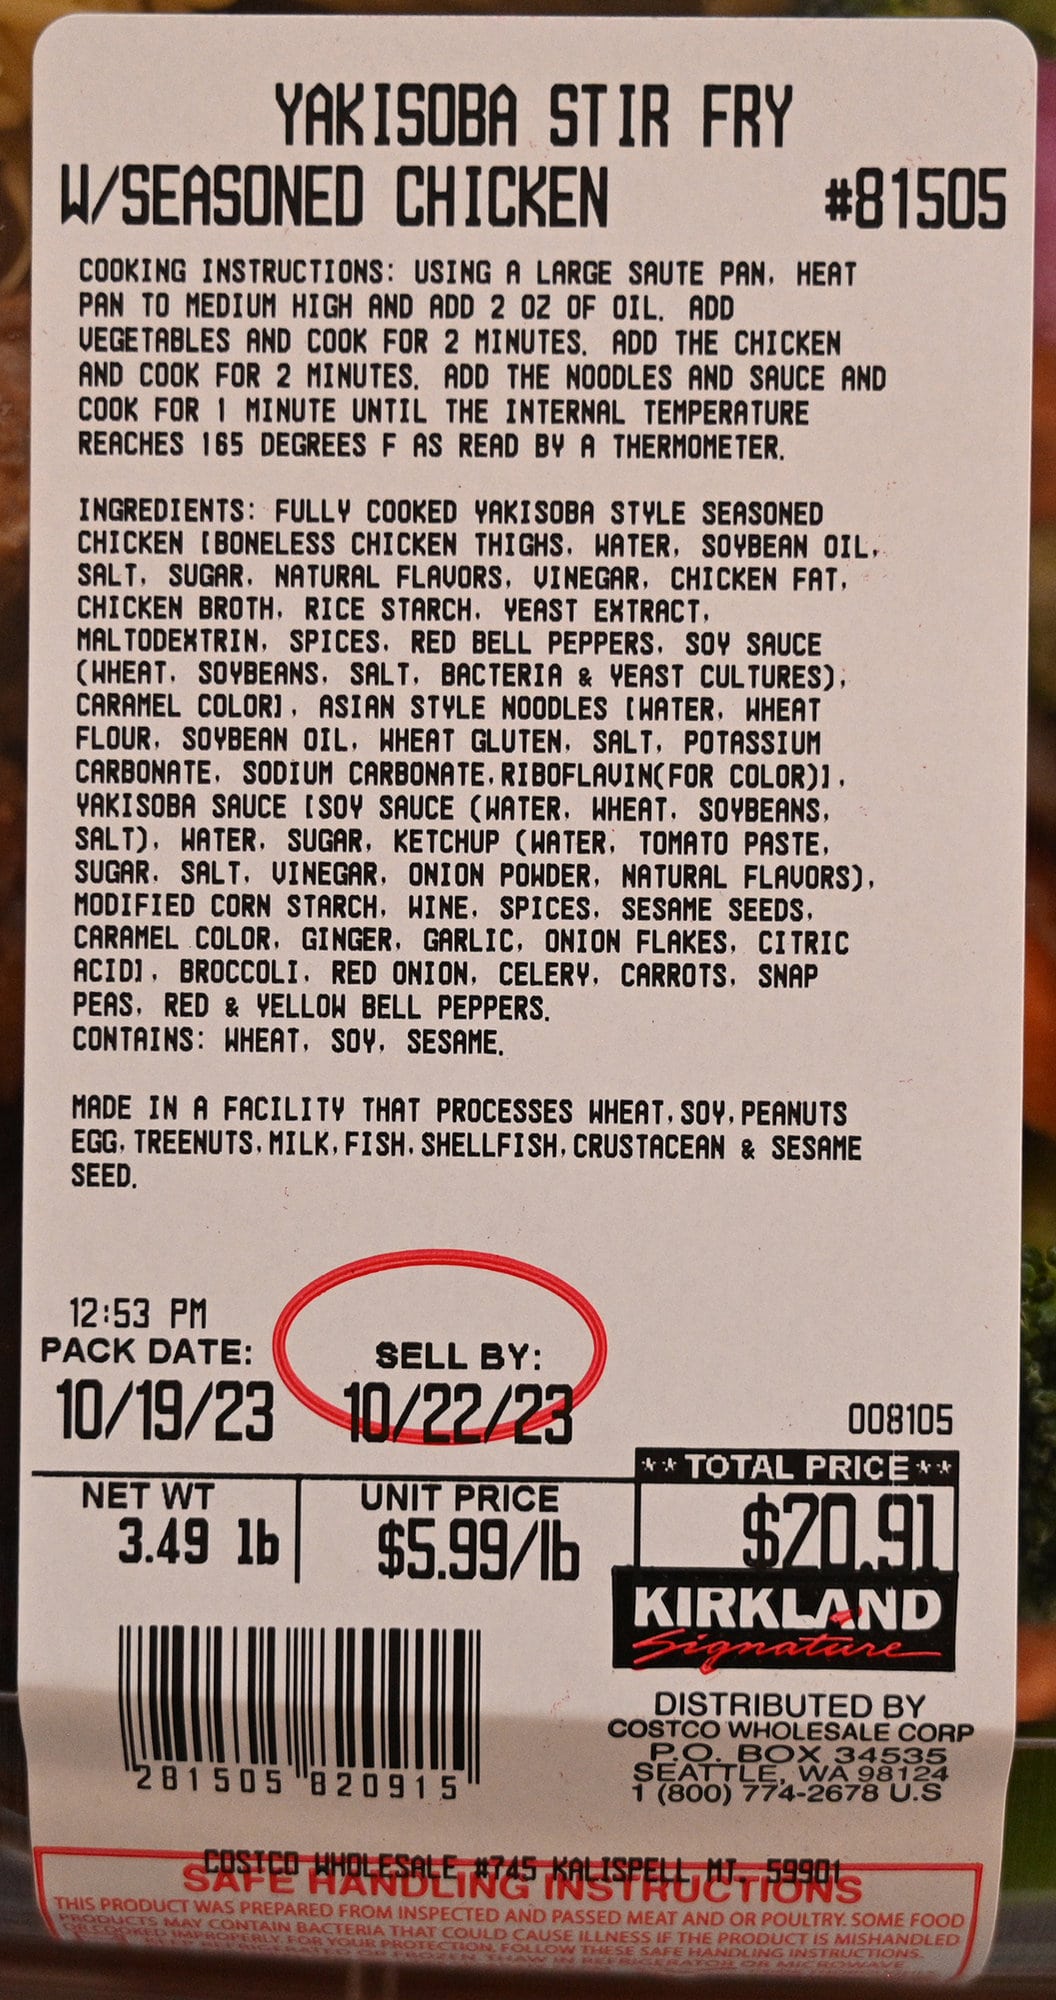 Closeup image of the front label on the chicken yakisoba showing the ingredients, cooking instructions, sell-by date and cost.